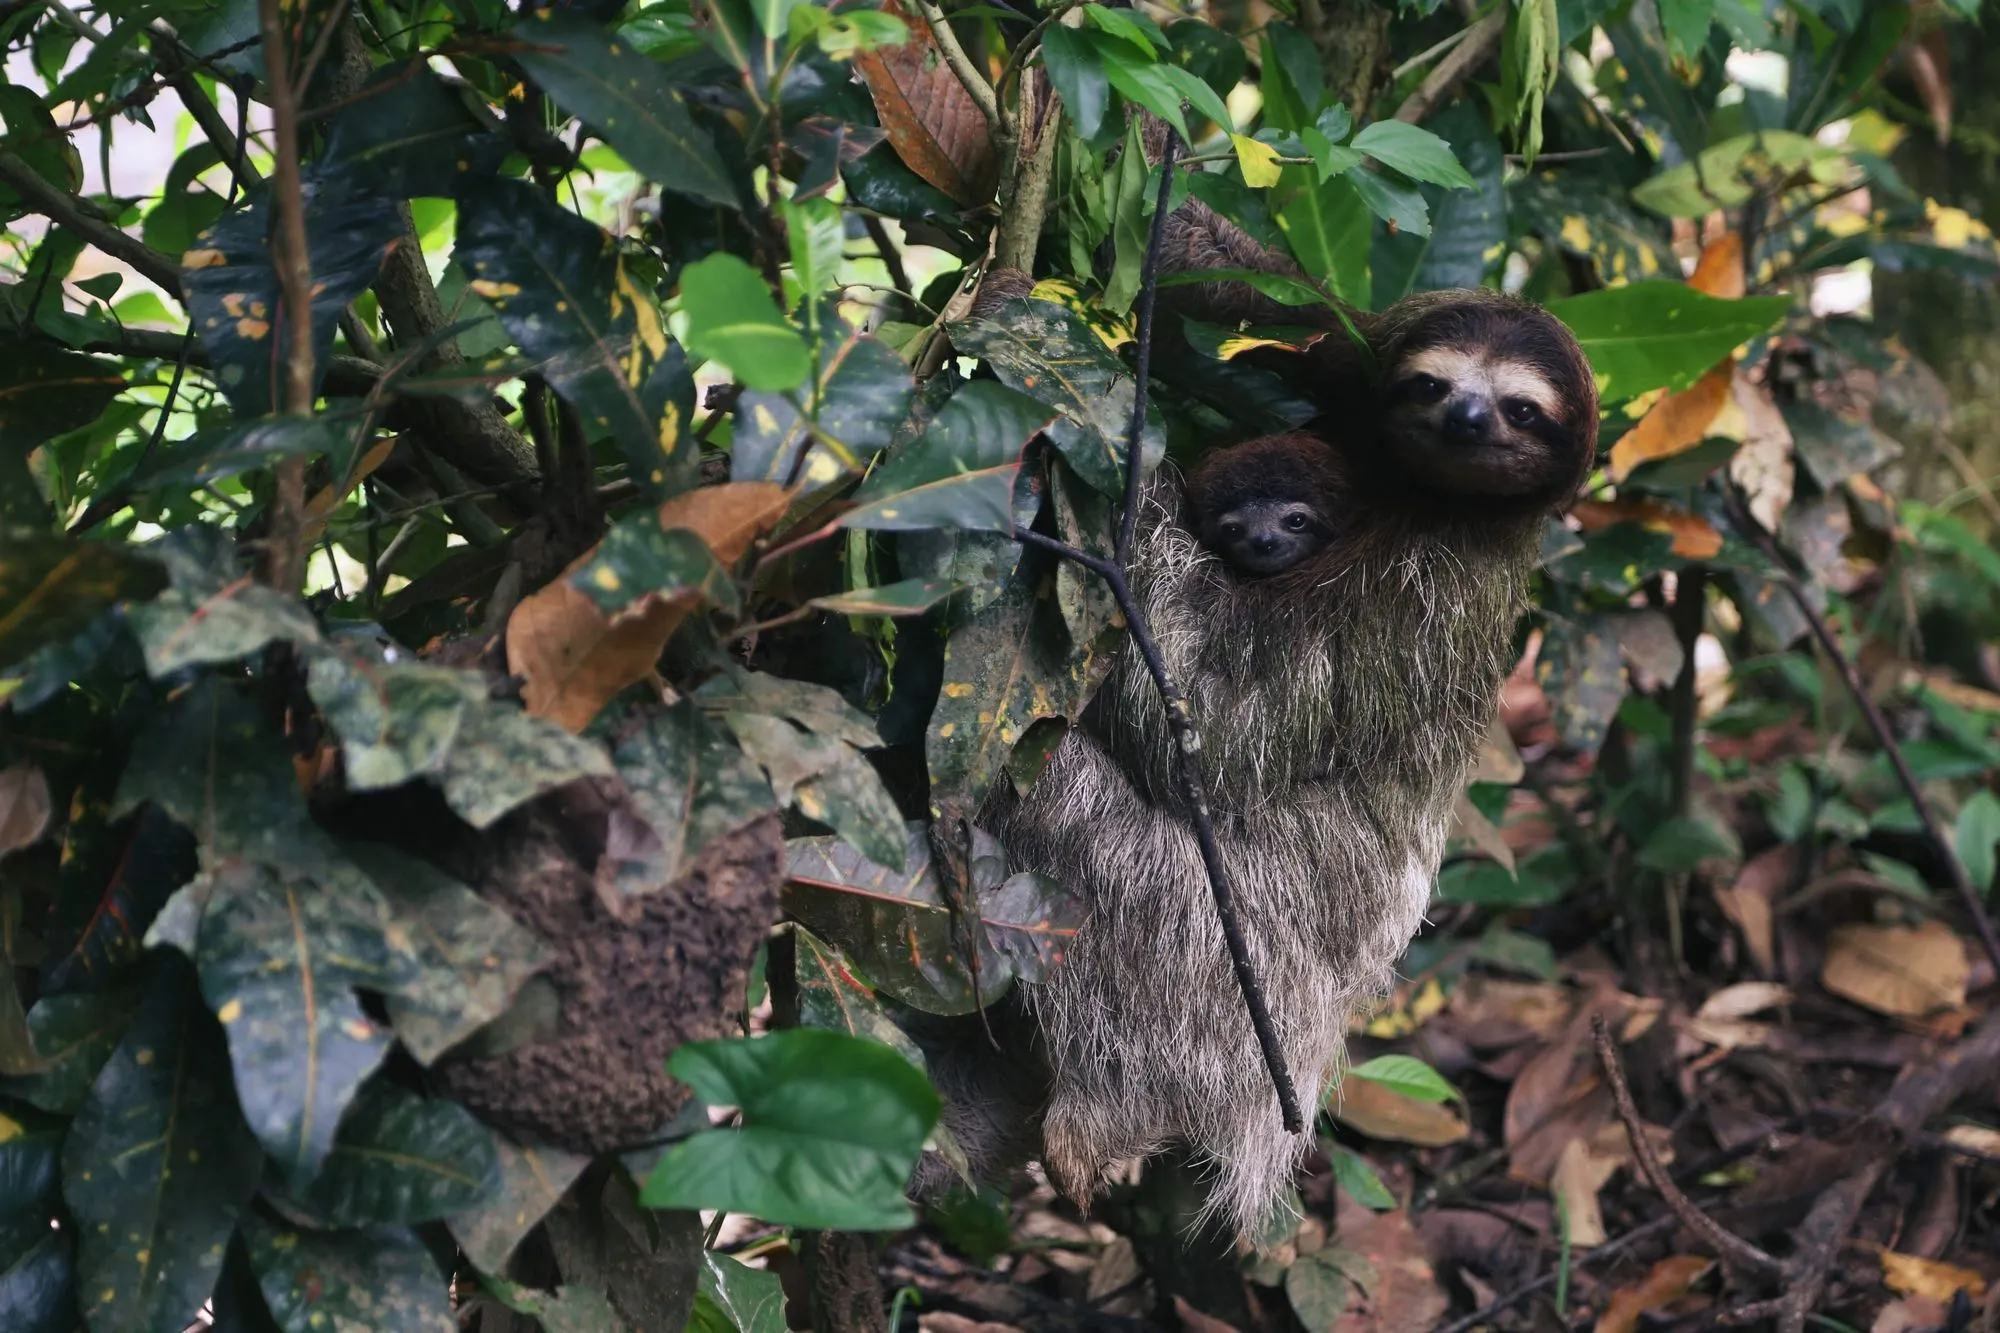 Are sloths dangerous? Read on to find out!